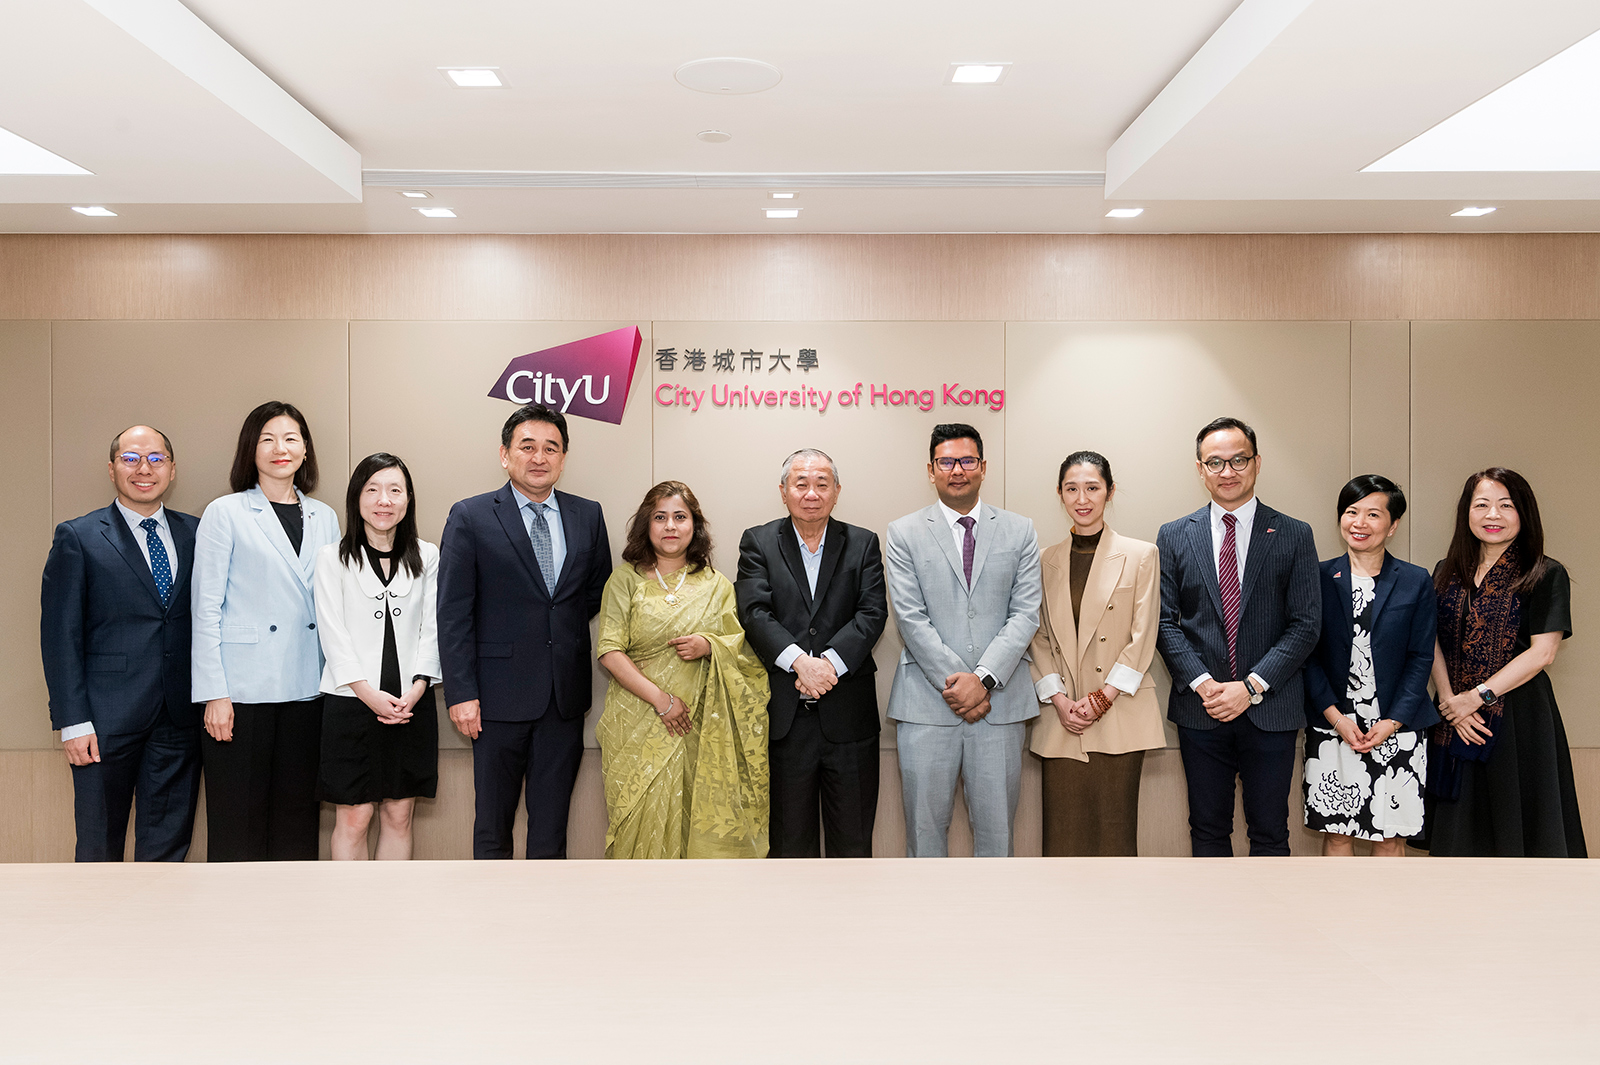 Ms Israt Ara (5th from left), Consul General of Bangladesh in Hong Kong, and Mr Md Marzuk Islam (5th from right), Vice Consul, visited CityU and met with Professor Freddy Boey Yin Chiang (6th from right), CityU President and the management team of CityU.